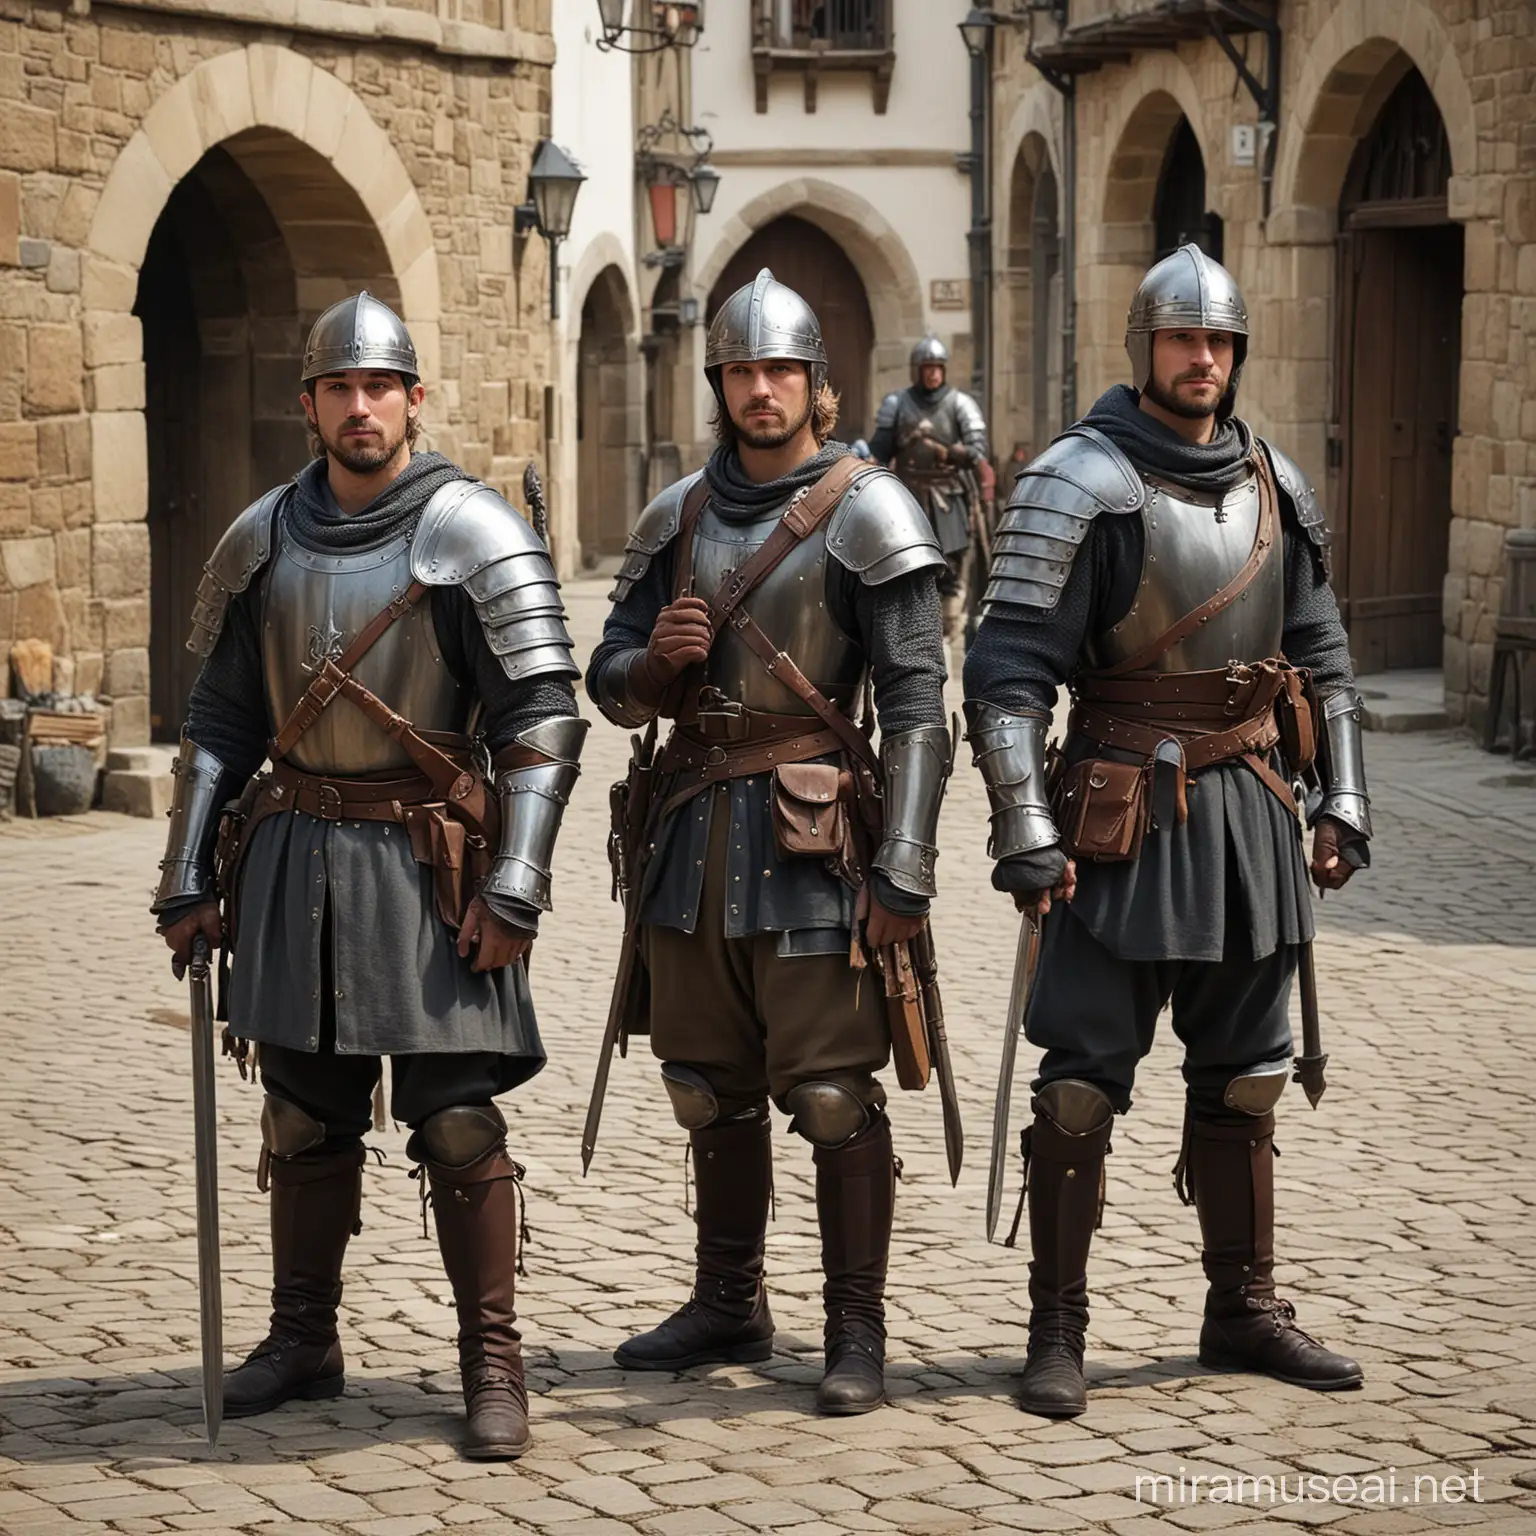 guards, medieval, townspeople, fantasy, armed